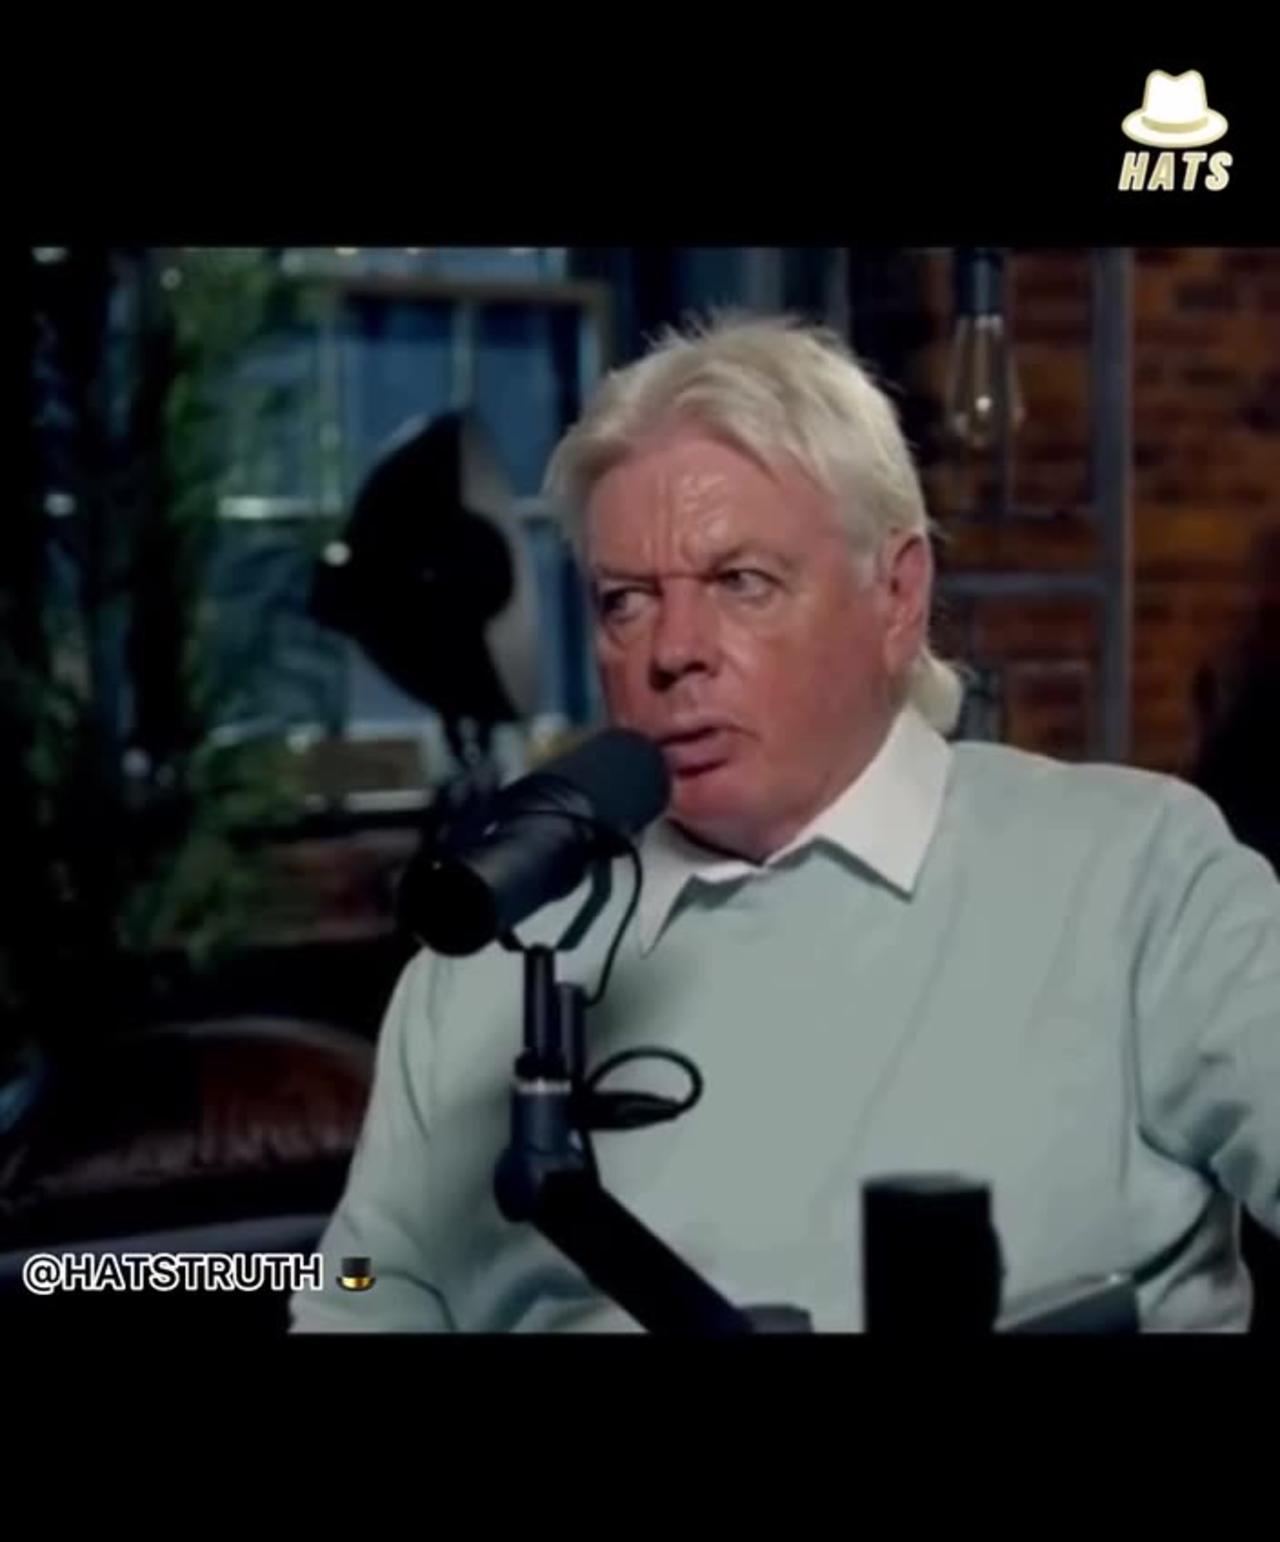 David Icke: “Assassinations are not just made to happen, they’re allowed to happen.”